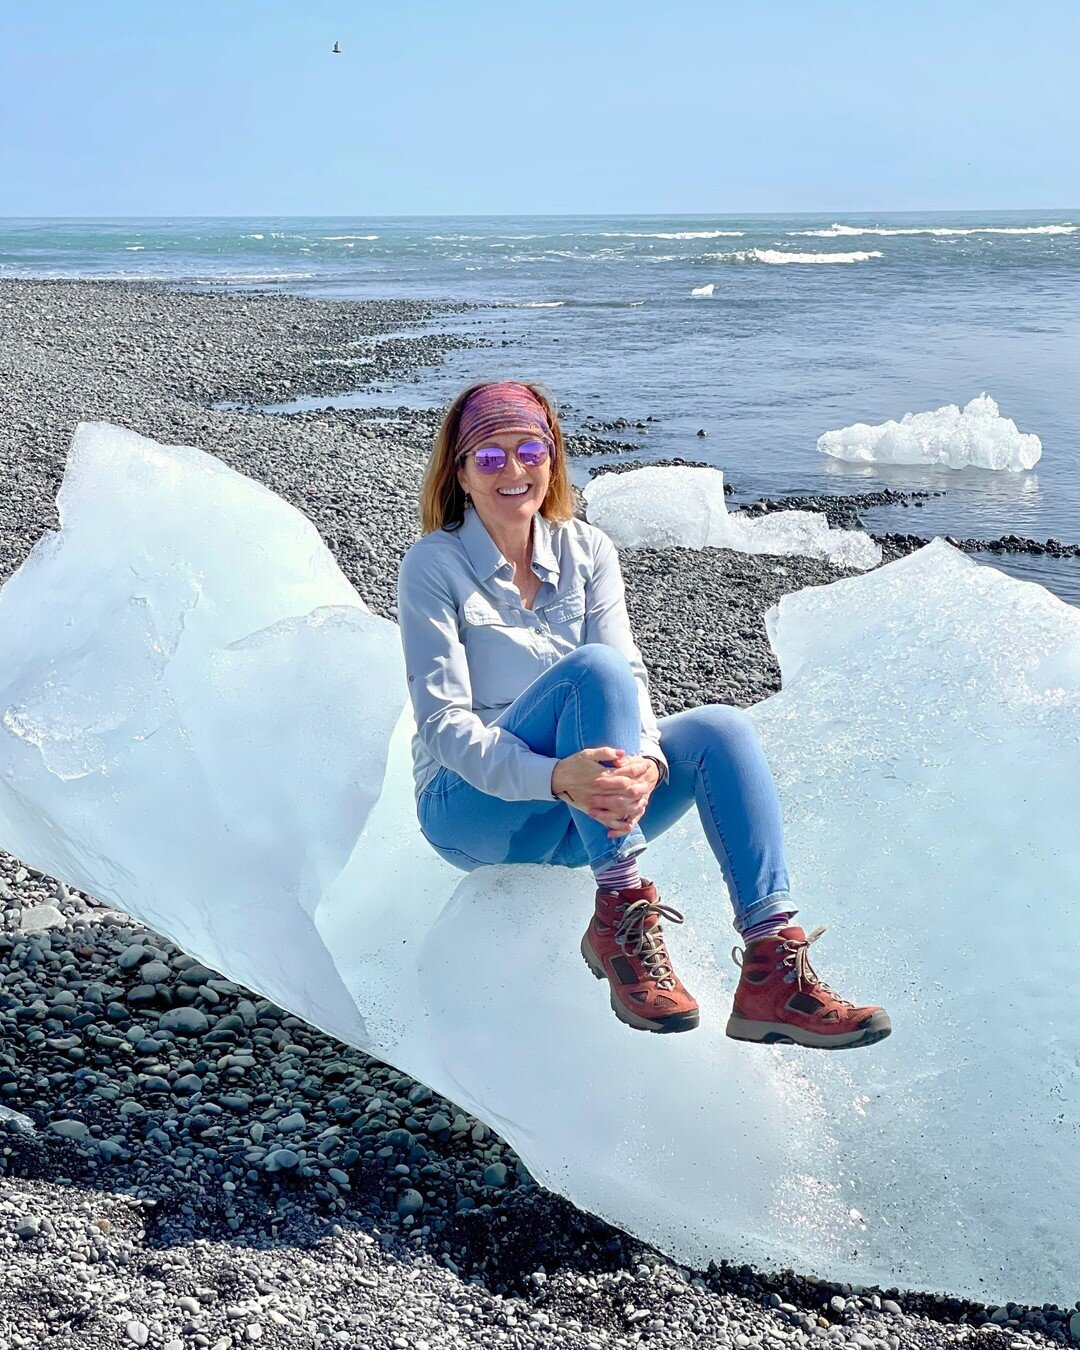 I had an amazing experience this summer.⠀⠀⠀⠀⠀⠀⠀⠀⠀
⠀⠀⠀⠀⠀⠀⠀⠀⠀
My dear friend @thistledown.way planned a perfect trip for a small group of women to explore the wonders of Iceland.⠀⠀⠀⠀⠀⠀⠀⠀⠀
⠀⠀⠀⠀⠀⠀⠀⠀⠀
The travel was inspiring. I mean, how often in your li